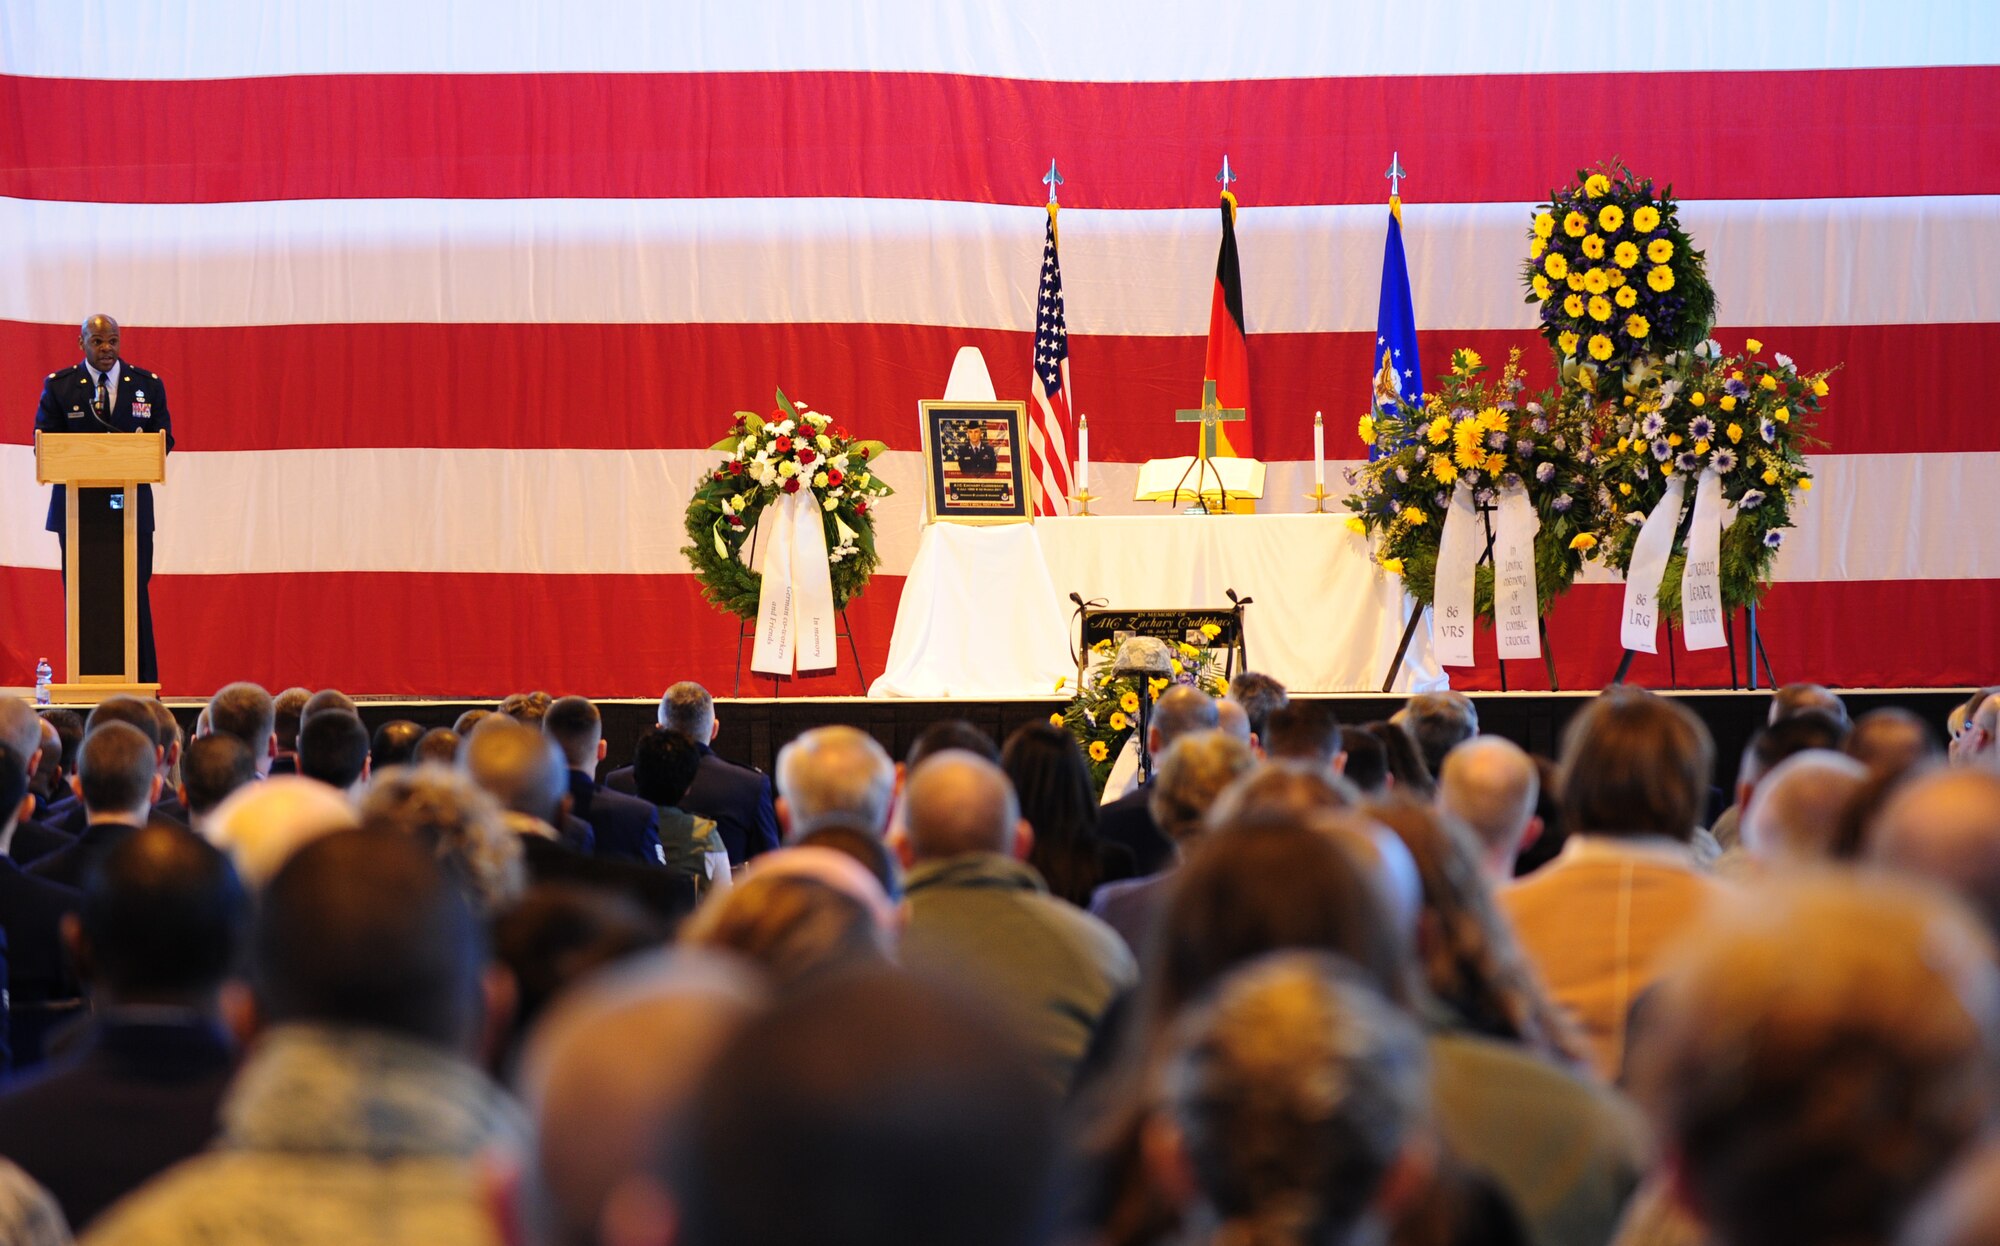 U.S. Air Force Lt. Col. Uduak Udoaka, 86th Vehicle Readiness Squadron commander, delivers his message during a memorial ceremony for Airman 1st Class Zachary Cuddeback, 86th VRS, Ramstein Air Base, Germany, March 10, 2011. Airman Cuddeback was killed in action at Frankfurt International Airport March 2, 2011. (U.S. Air Force photo by Senior Airman Brittany Perry)